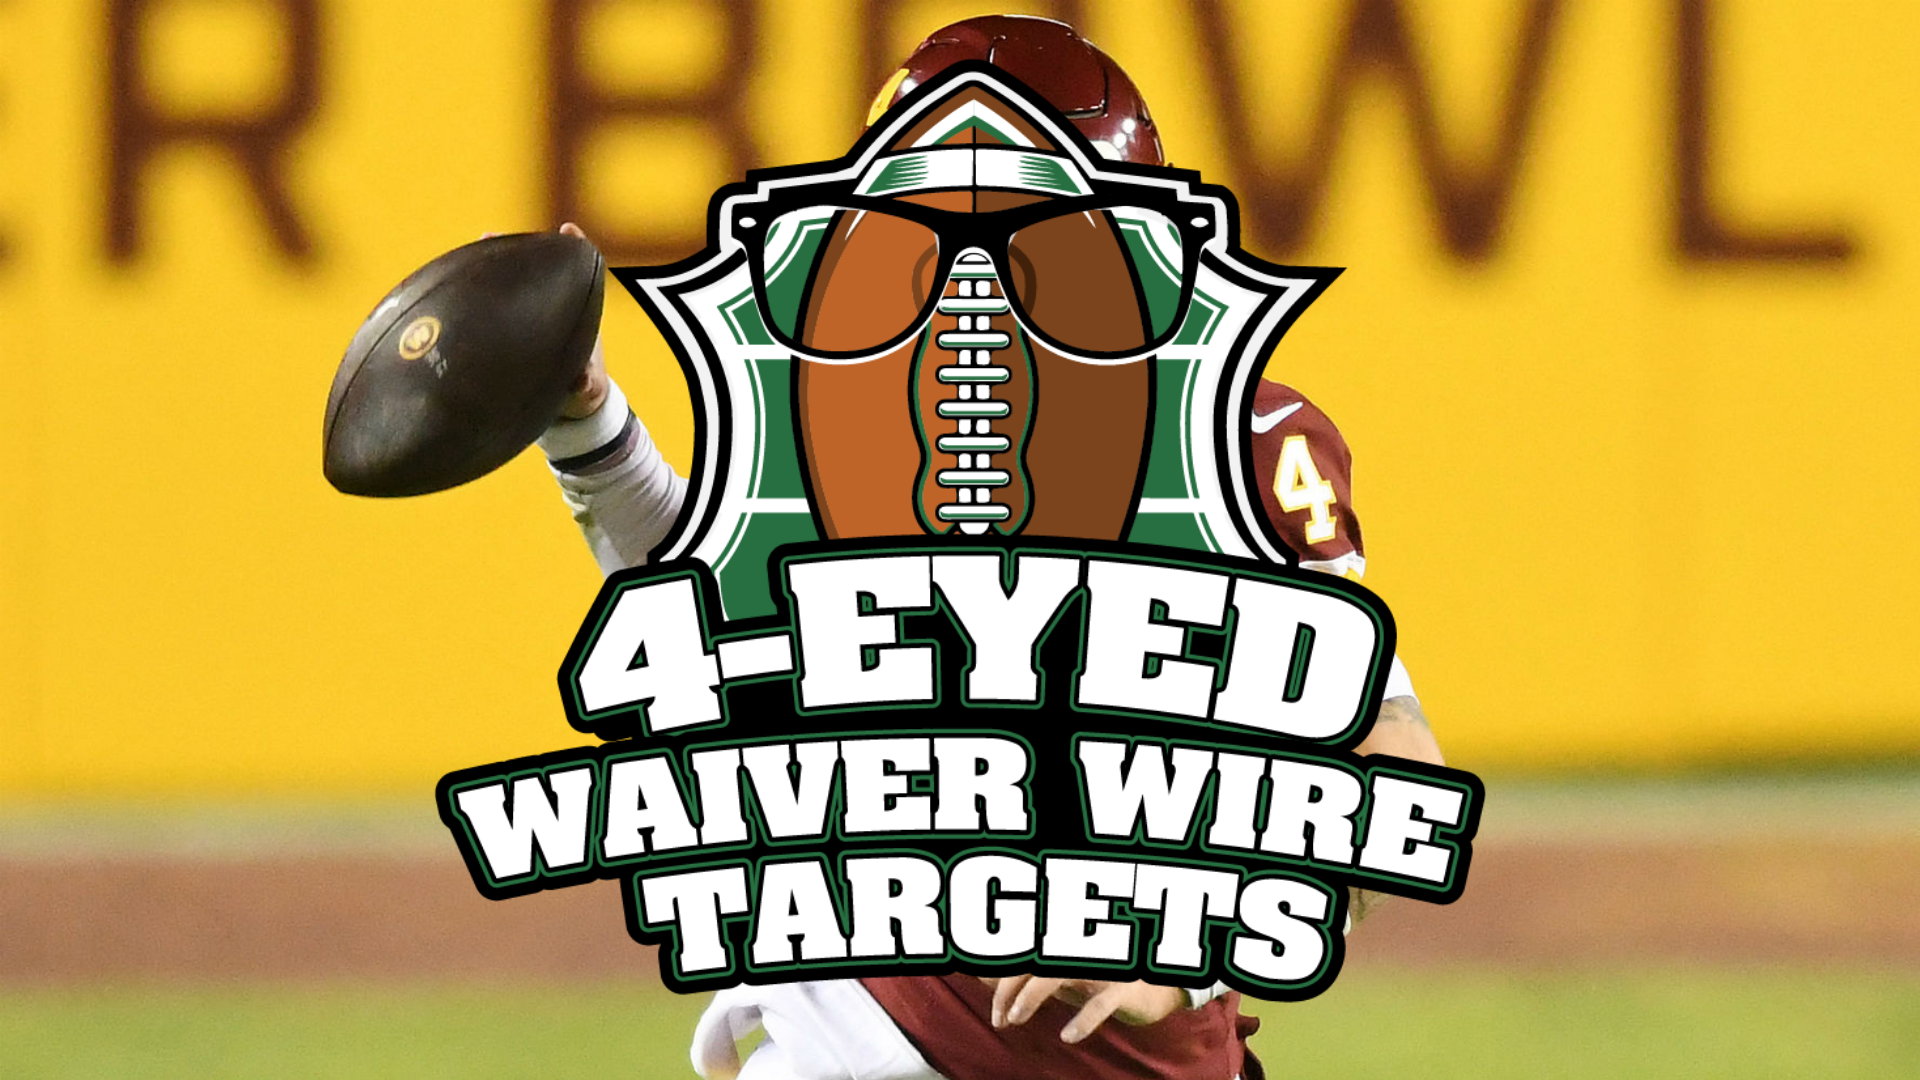 Waiver Wire Targets for Week 5 (2021) Fantasy In Frames